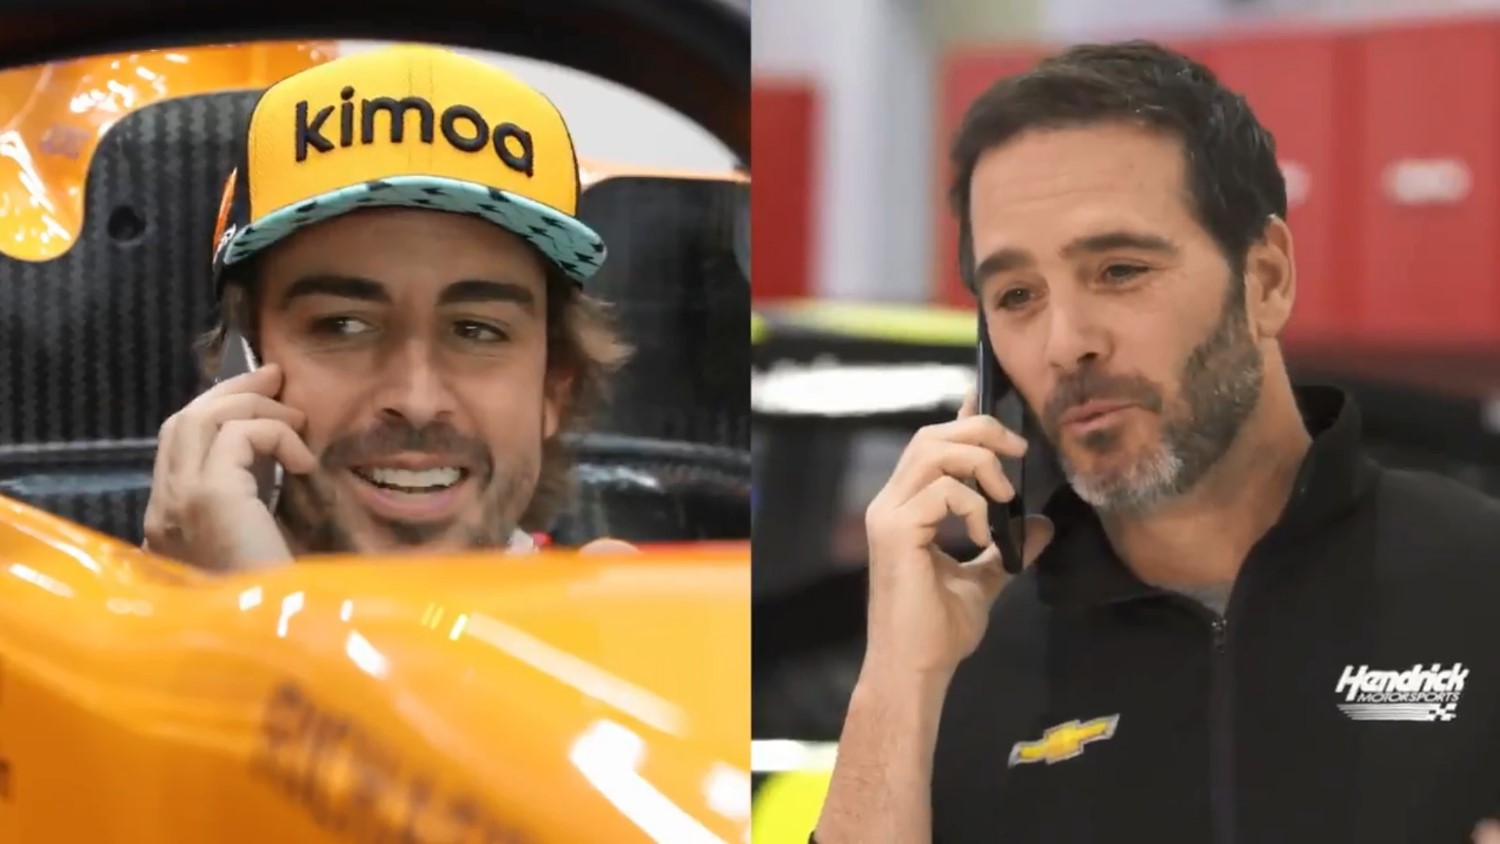 Alonso and Johnson ask each other to swap rides